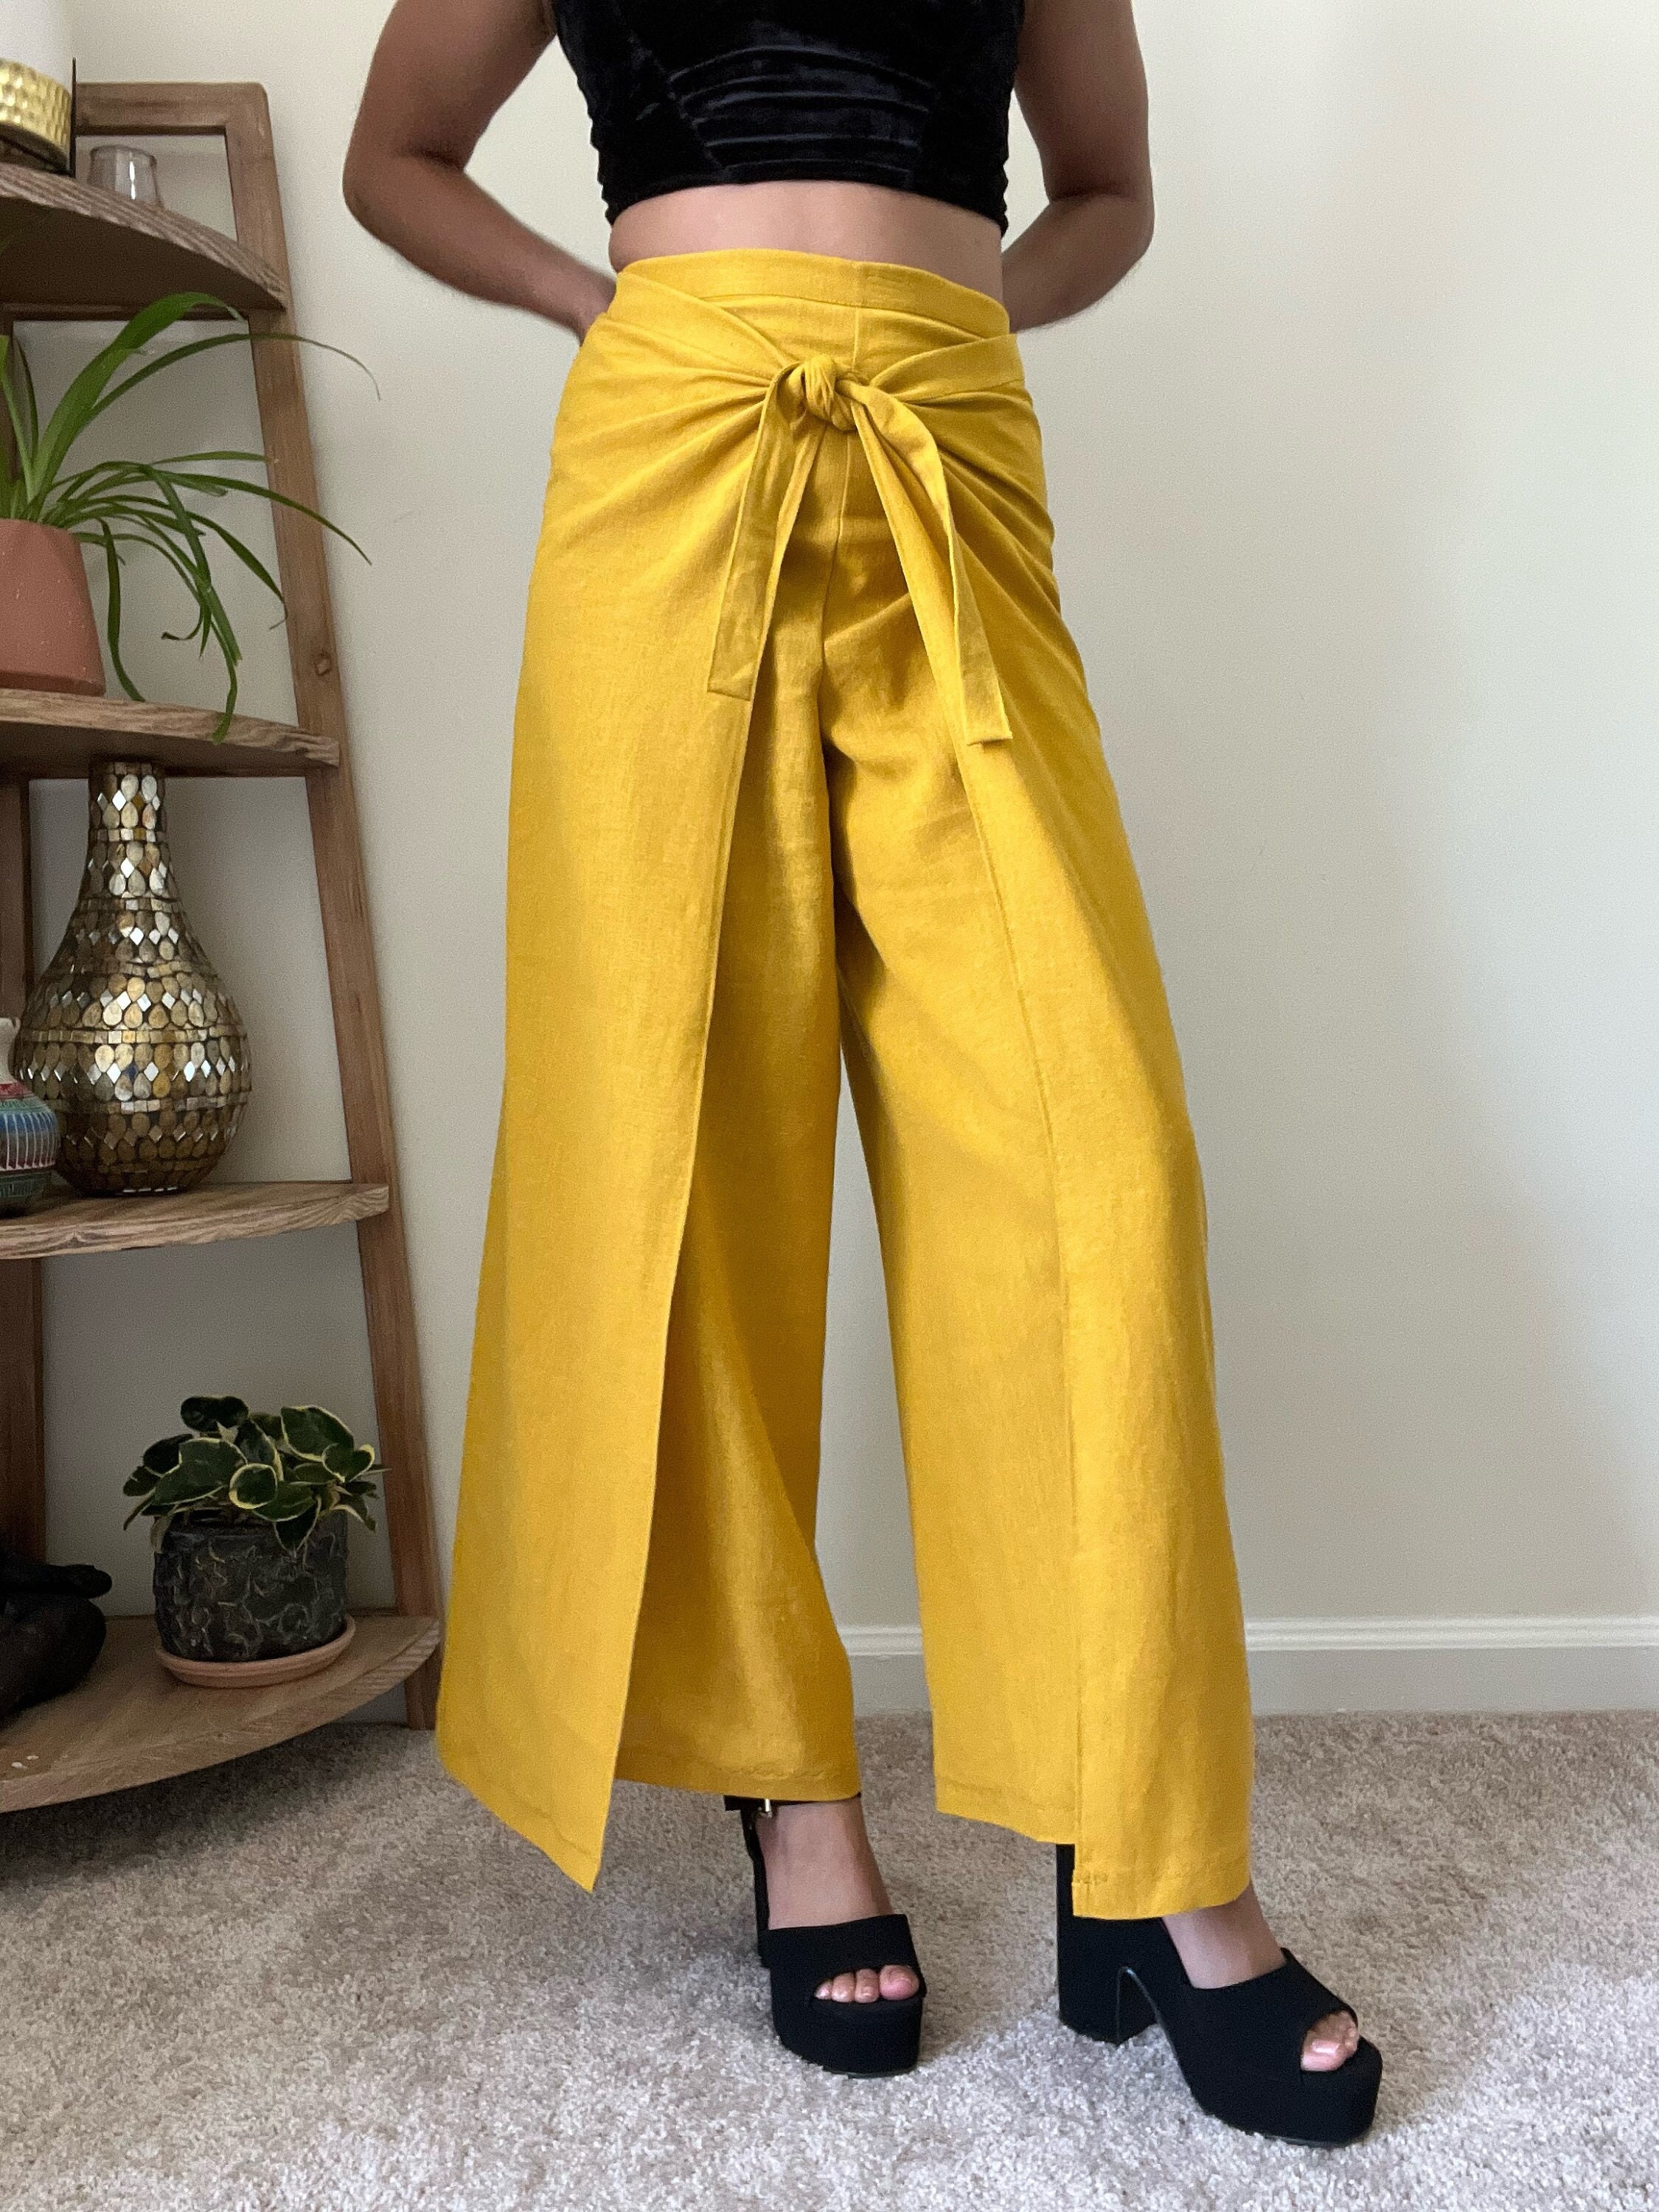 Yellow High-waist Wide leg pants The Store of Quality Fashion Items